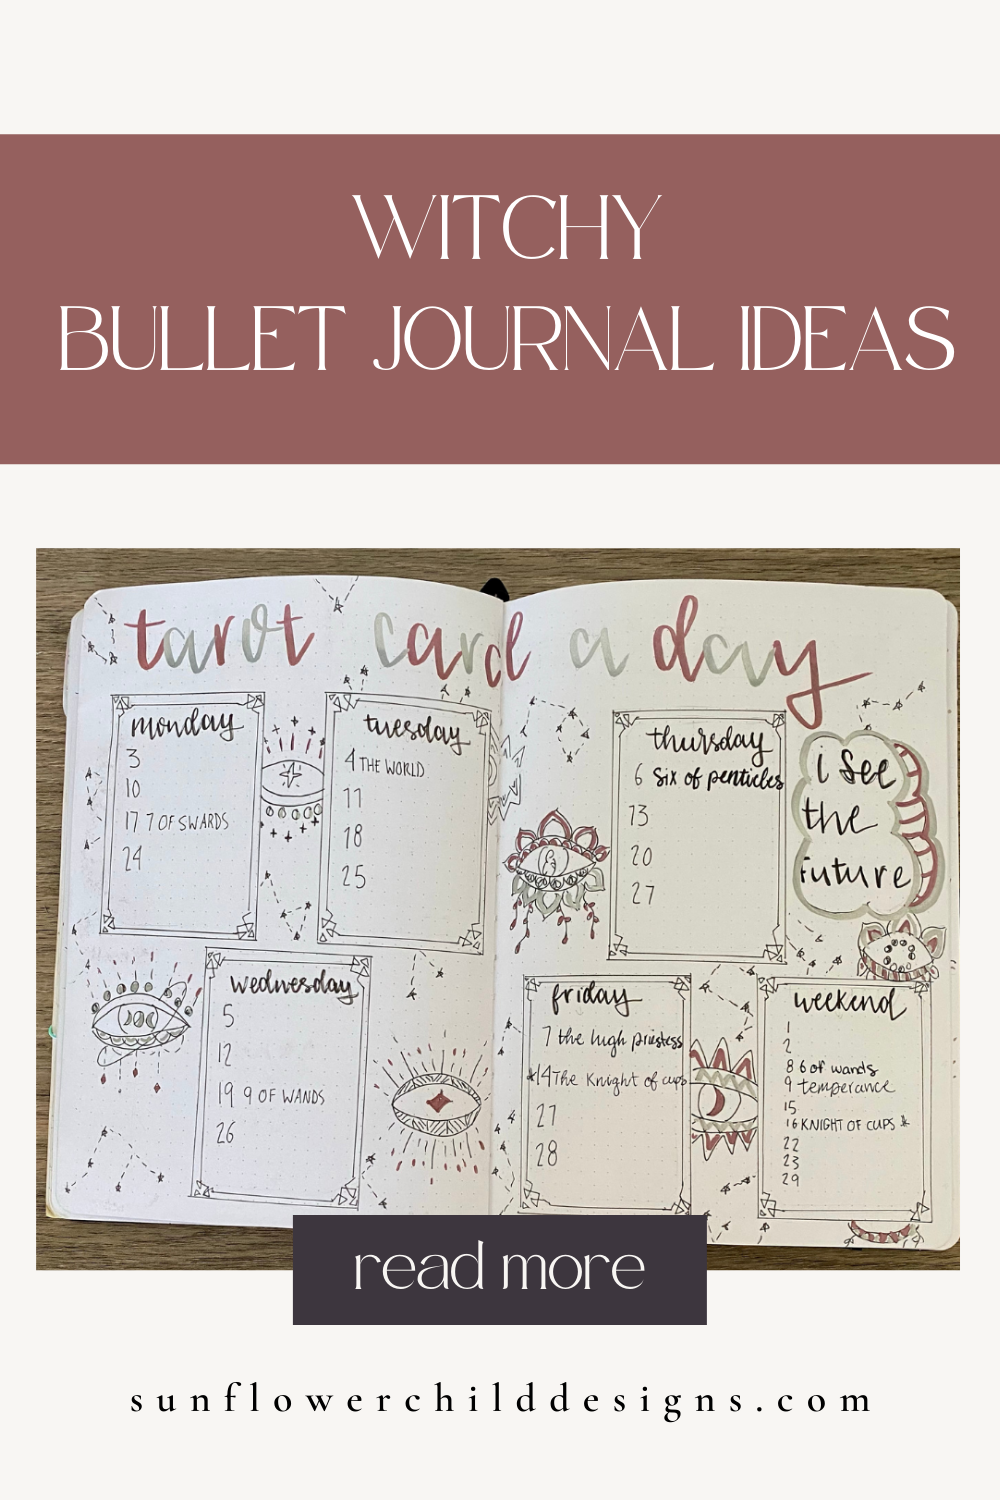 witchy-bullet-journal-ideas-february-bullet-journal-ideas 4.png